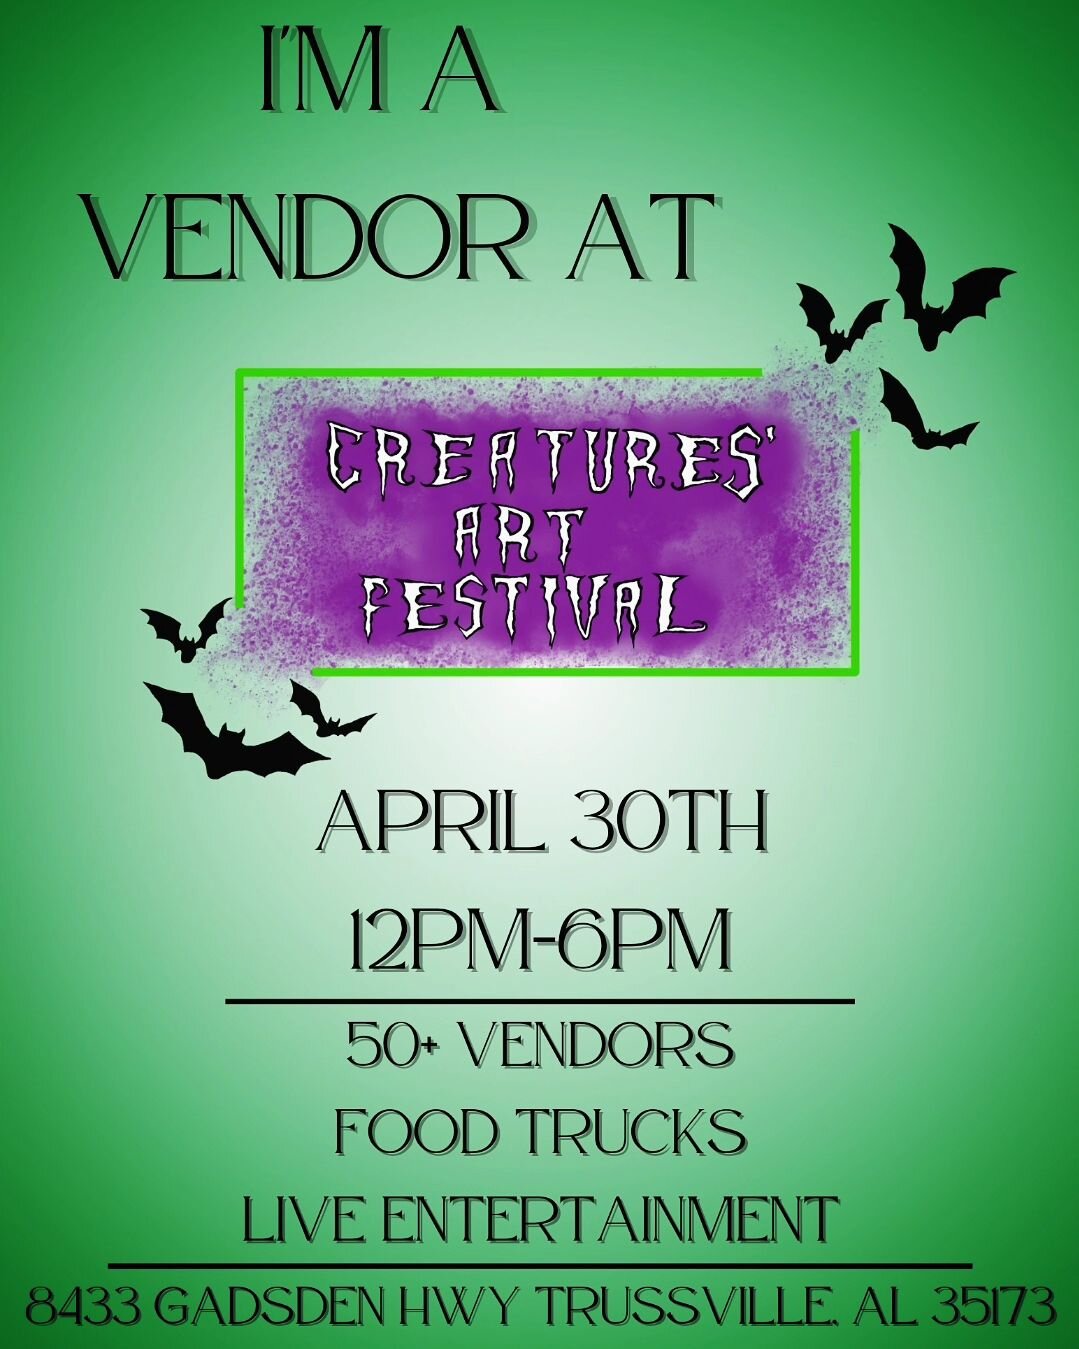 Sooo many amazing vendors, you're not going to want to miss it!!!! See you there 💜💀💜

#insanitariumhauntedattraction #insanitarium #thecelestialcaravan #handmade #artistmarket #artshow #buytheweirdstuff #buyweirdart #supportsmallbusiness #supportl